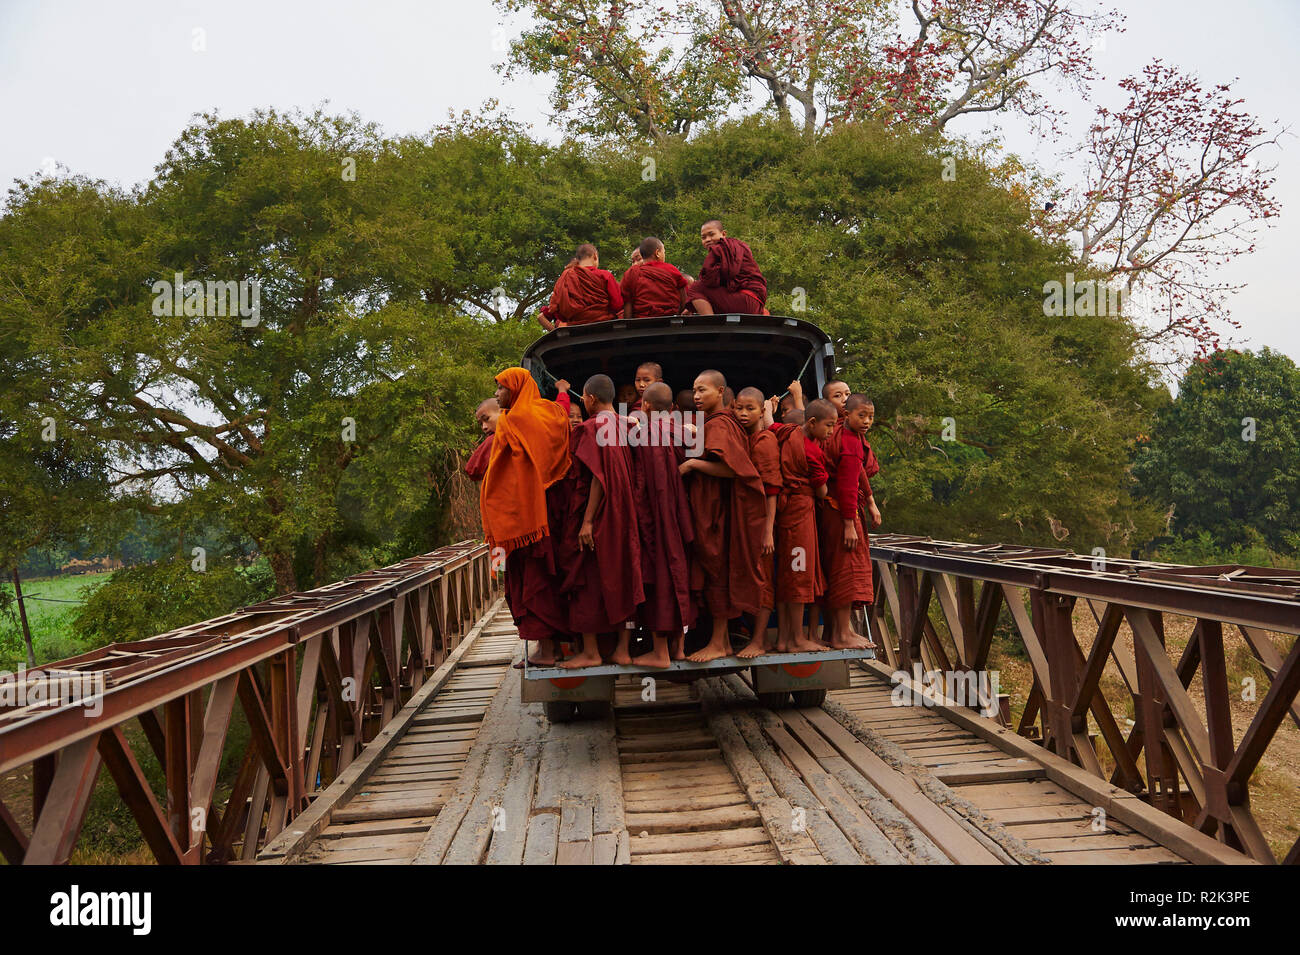 Monks on a vehicle, Myanmar, Asia, Stock Photo